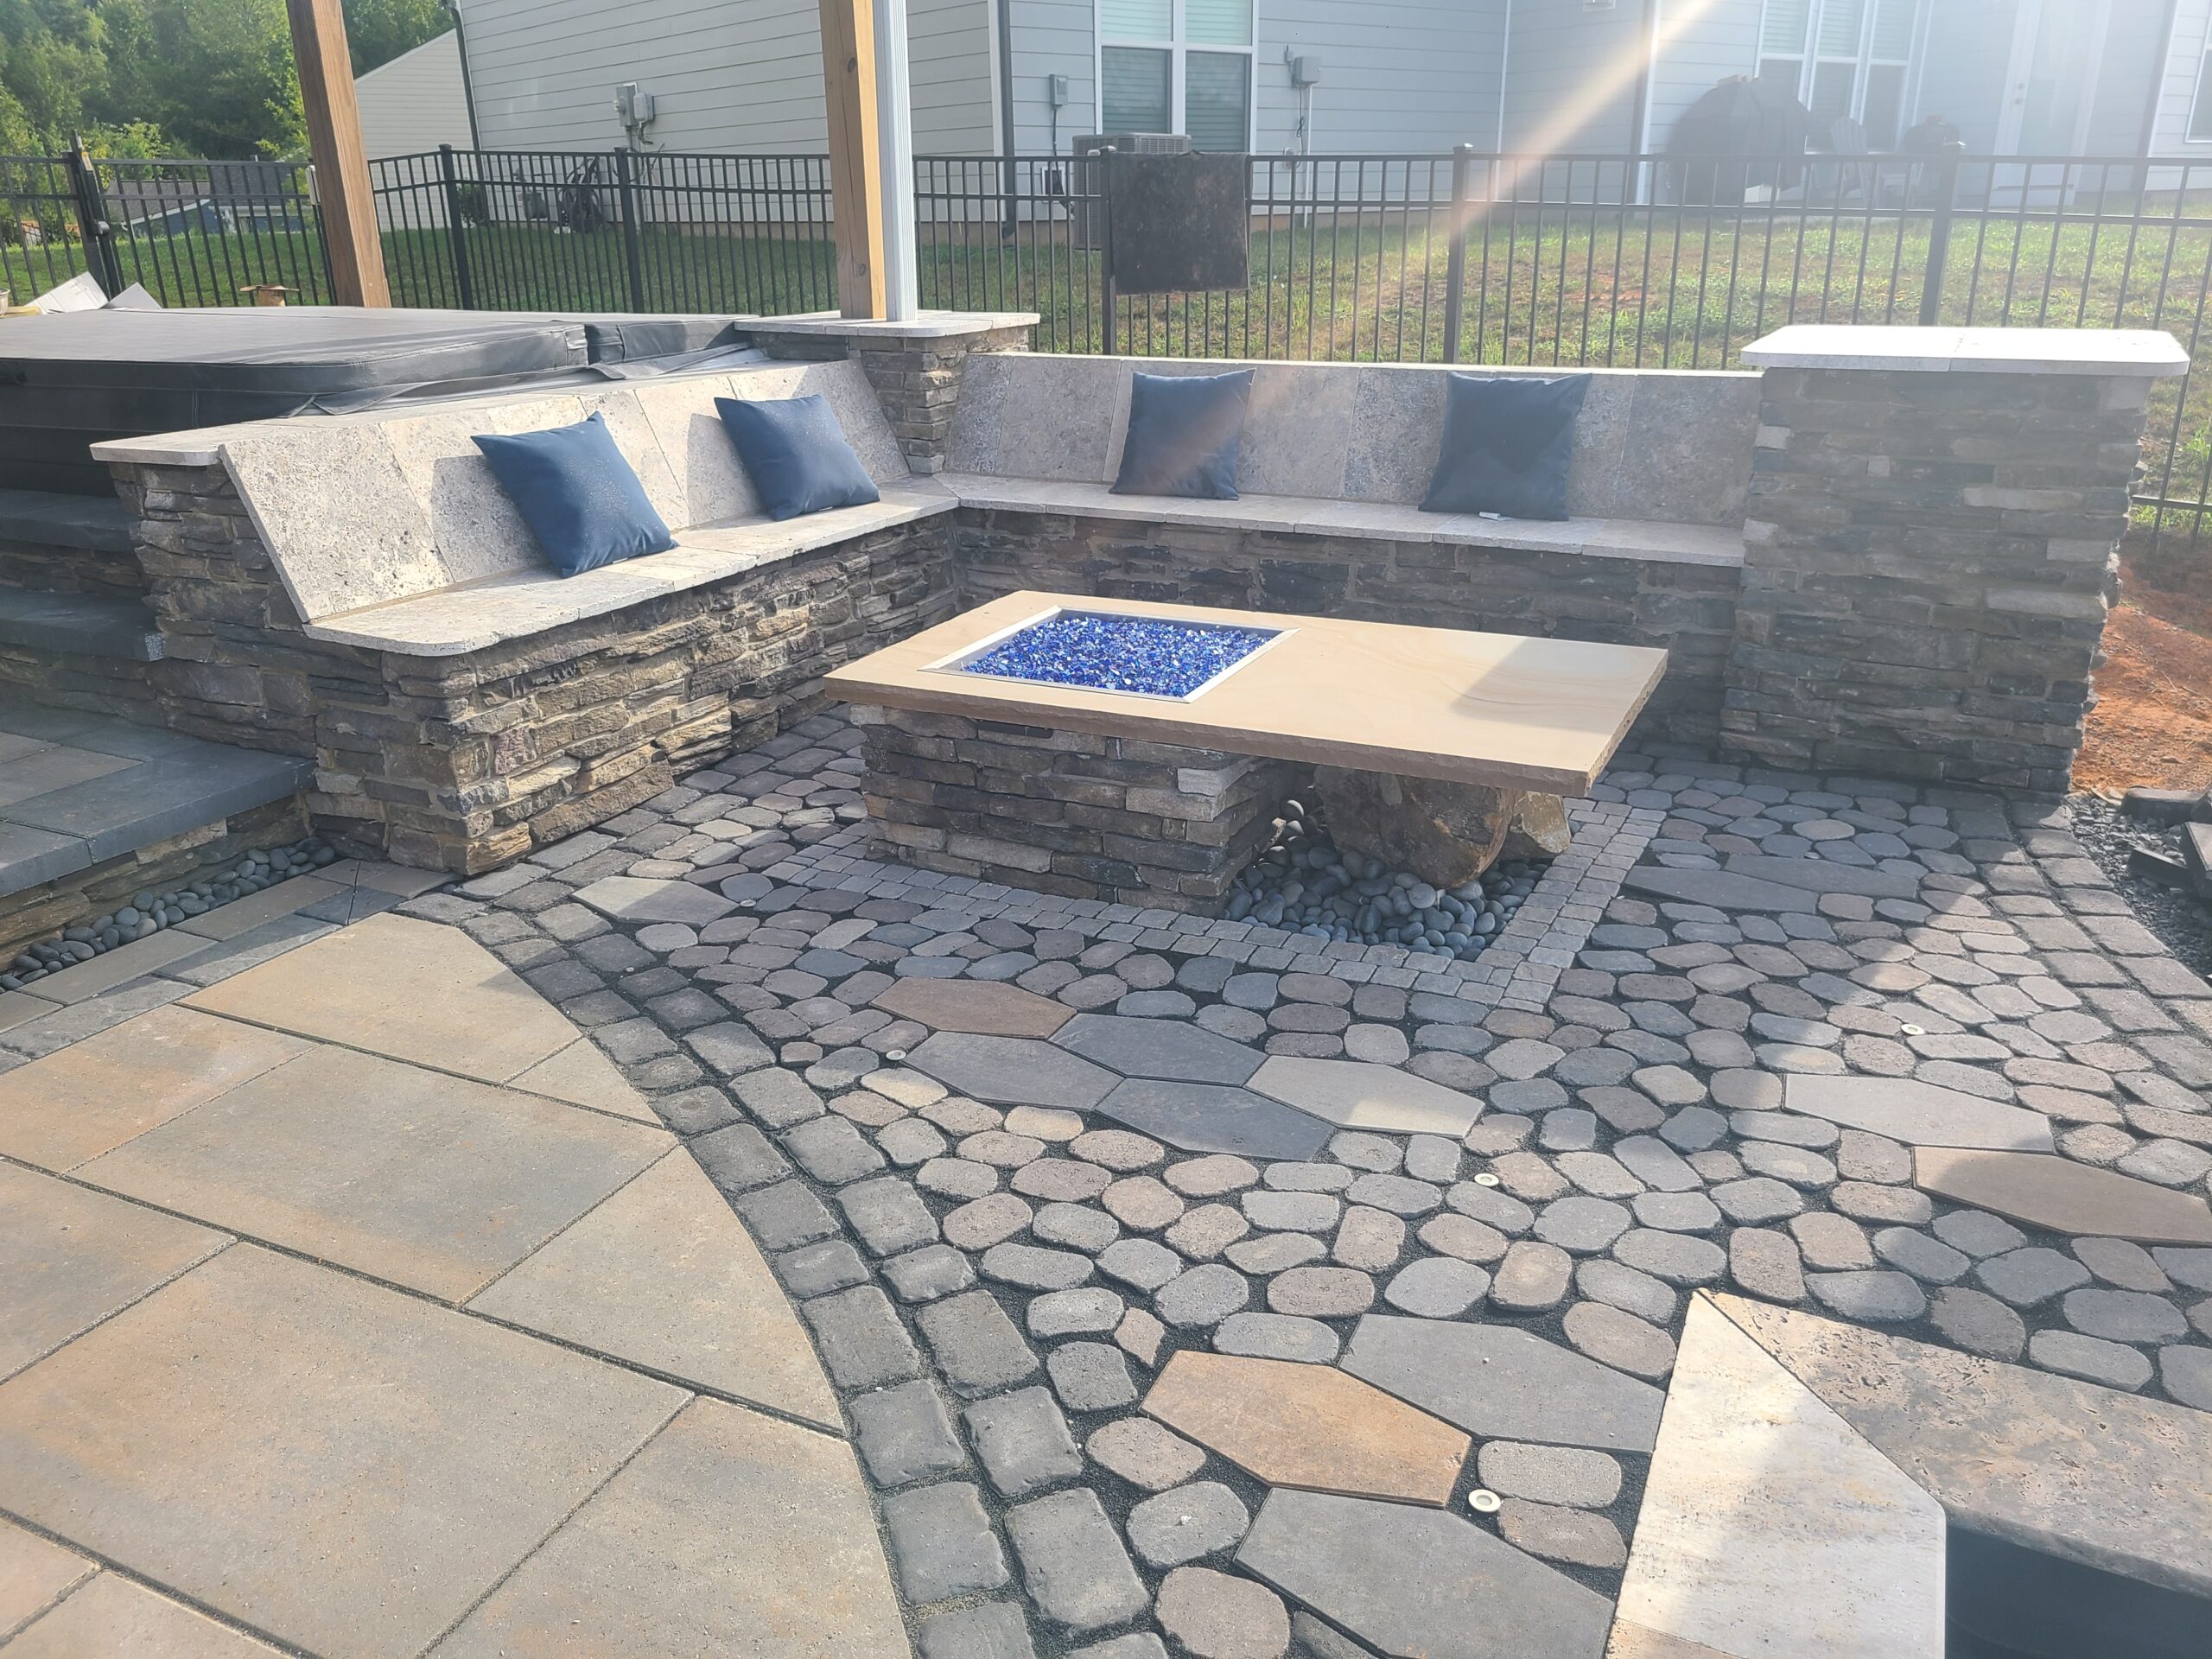 A fire pit with a concrete sitting wall and outdoor cushions